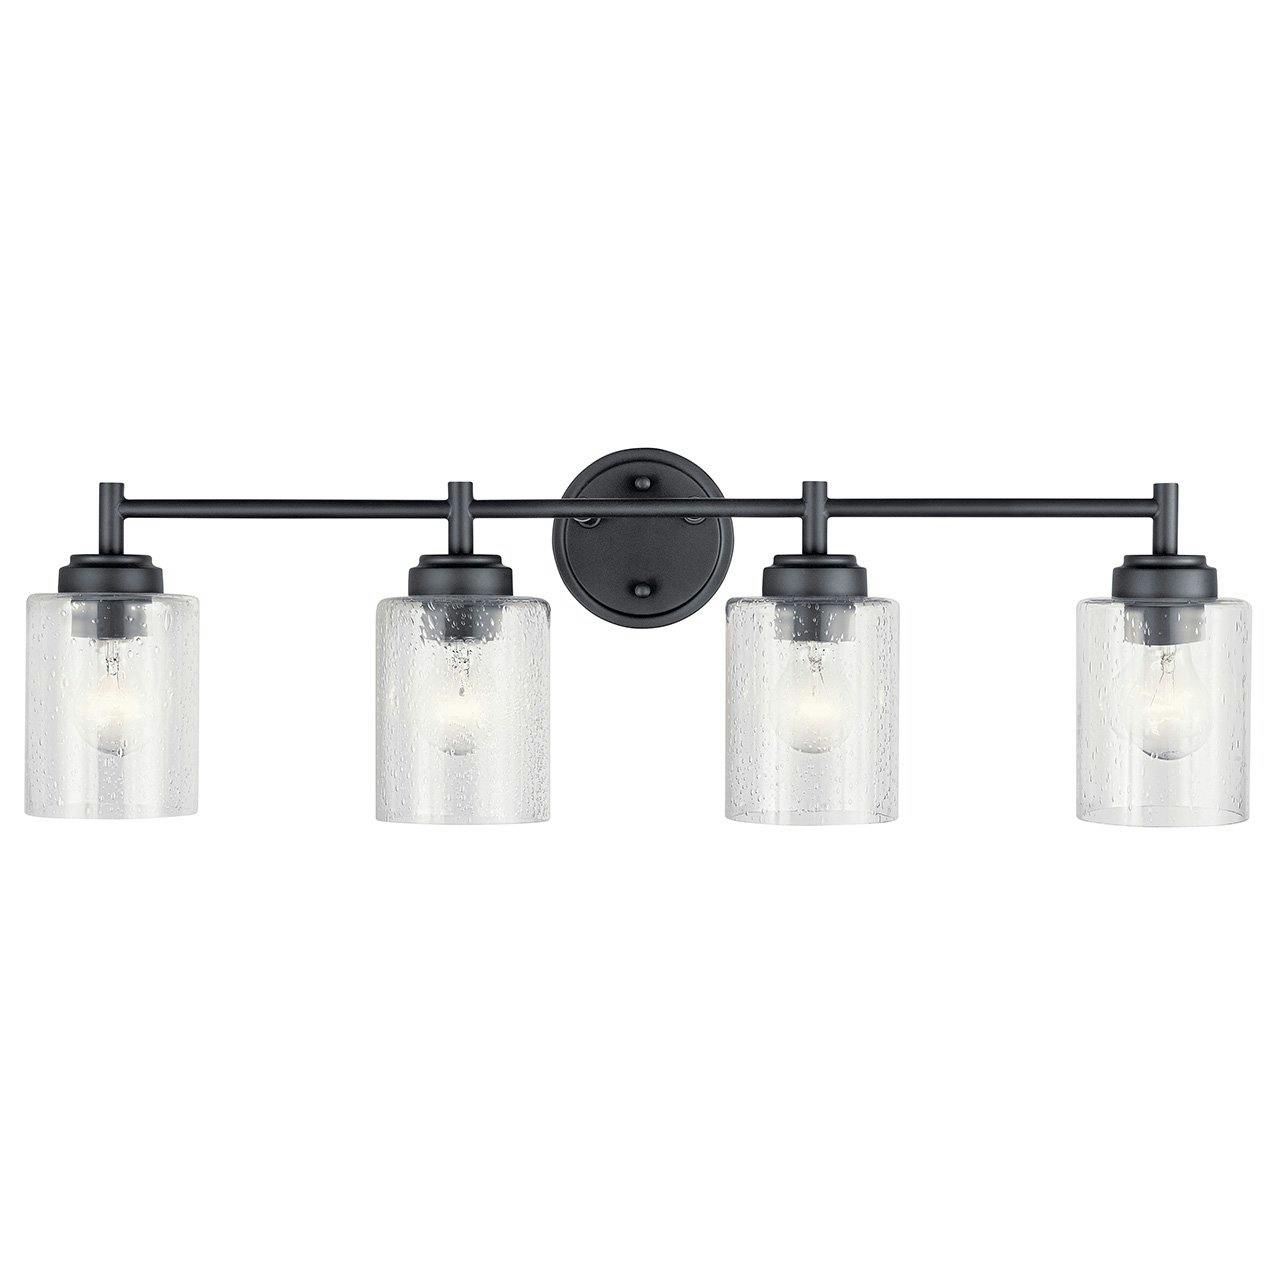 The Winslow 4 Light Vanity Light Black facing down on a white background